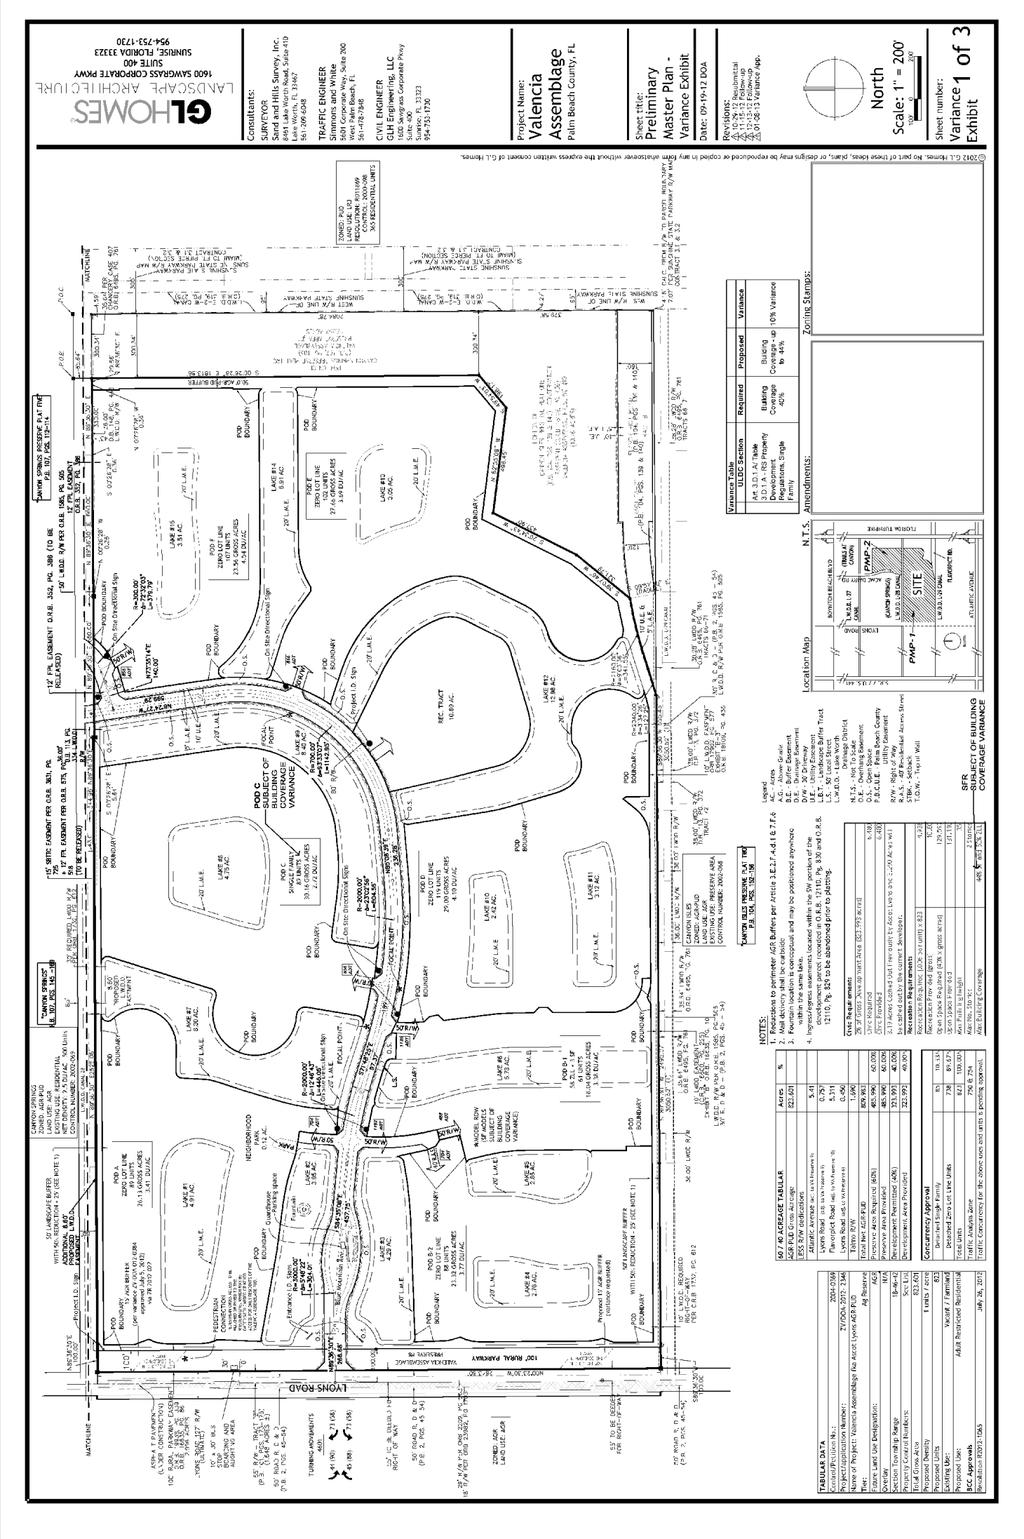 Figure 6 Preliminary Master Plan PMP-1 dated January 8, 2013 (consistent with